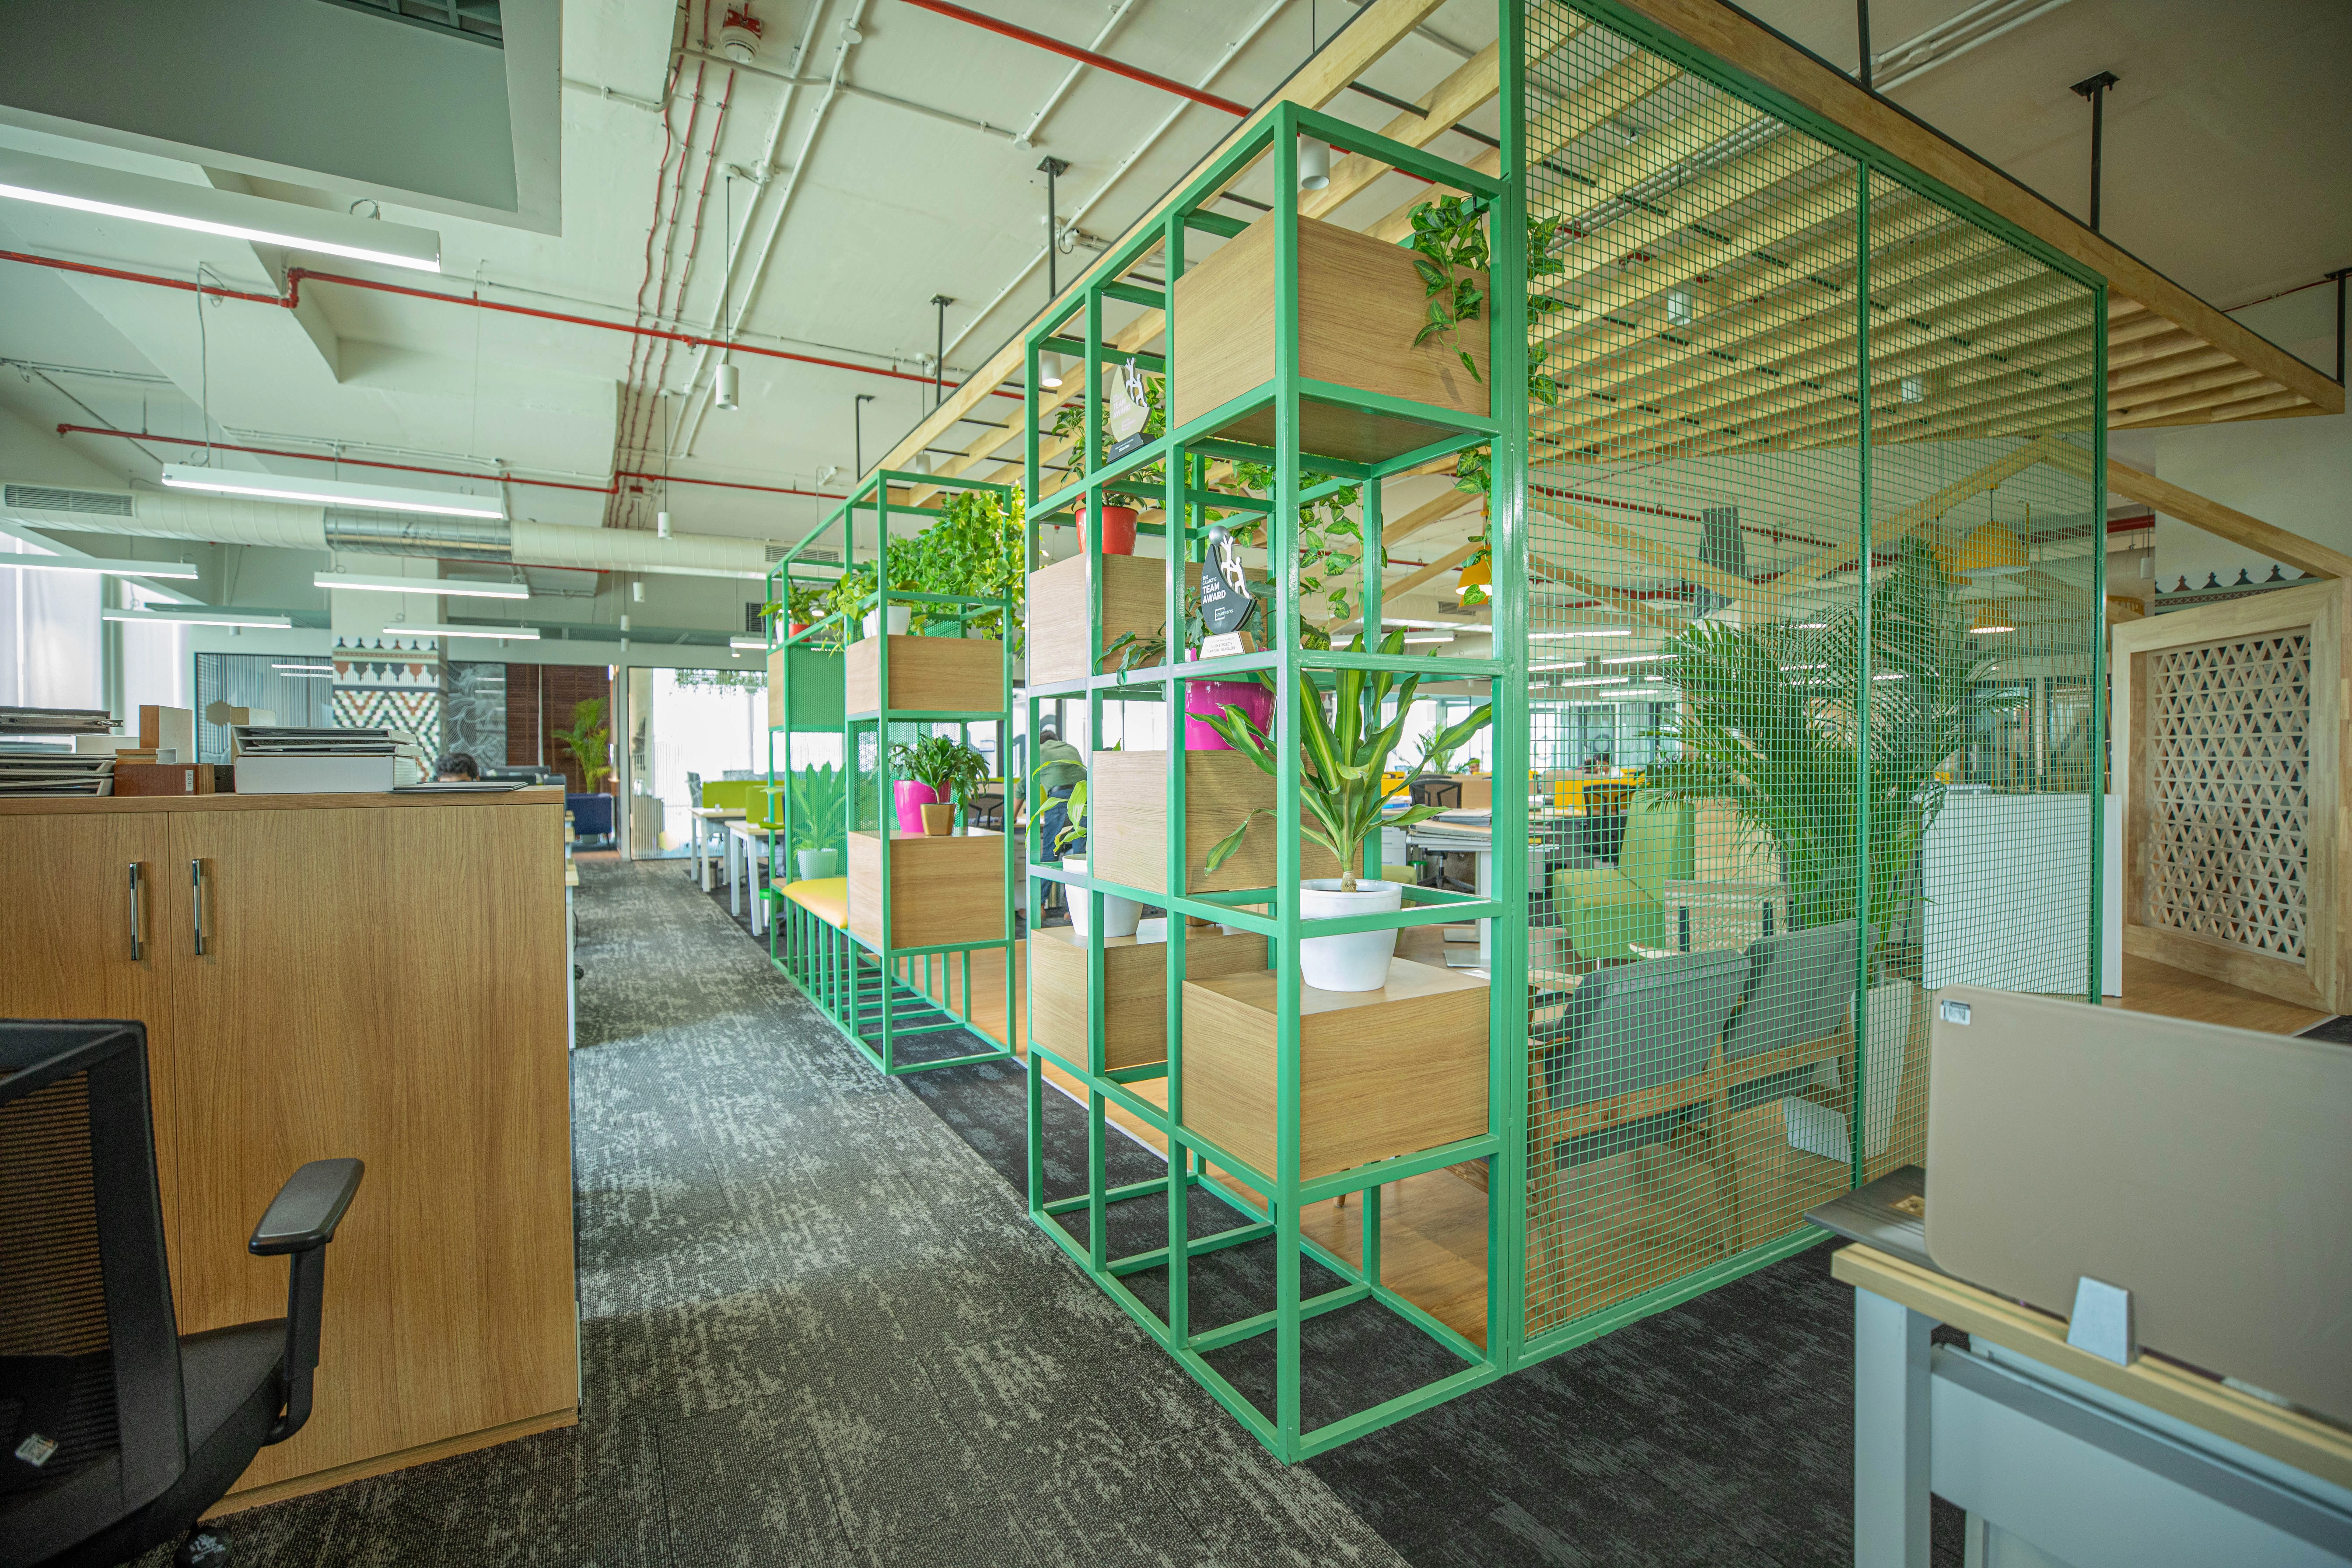 Office Space in Bangalore